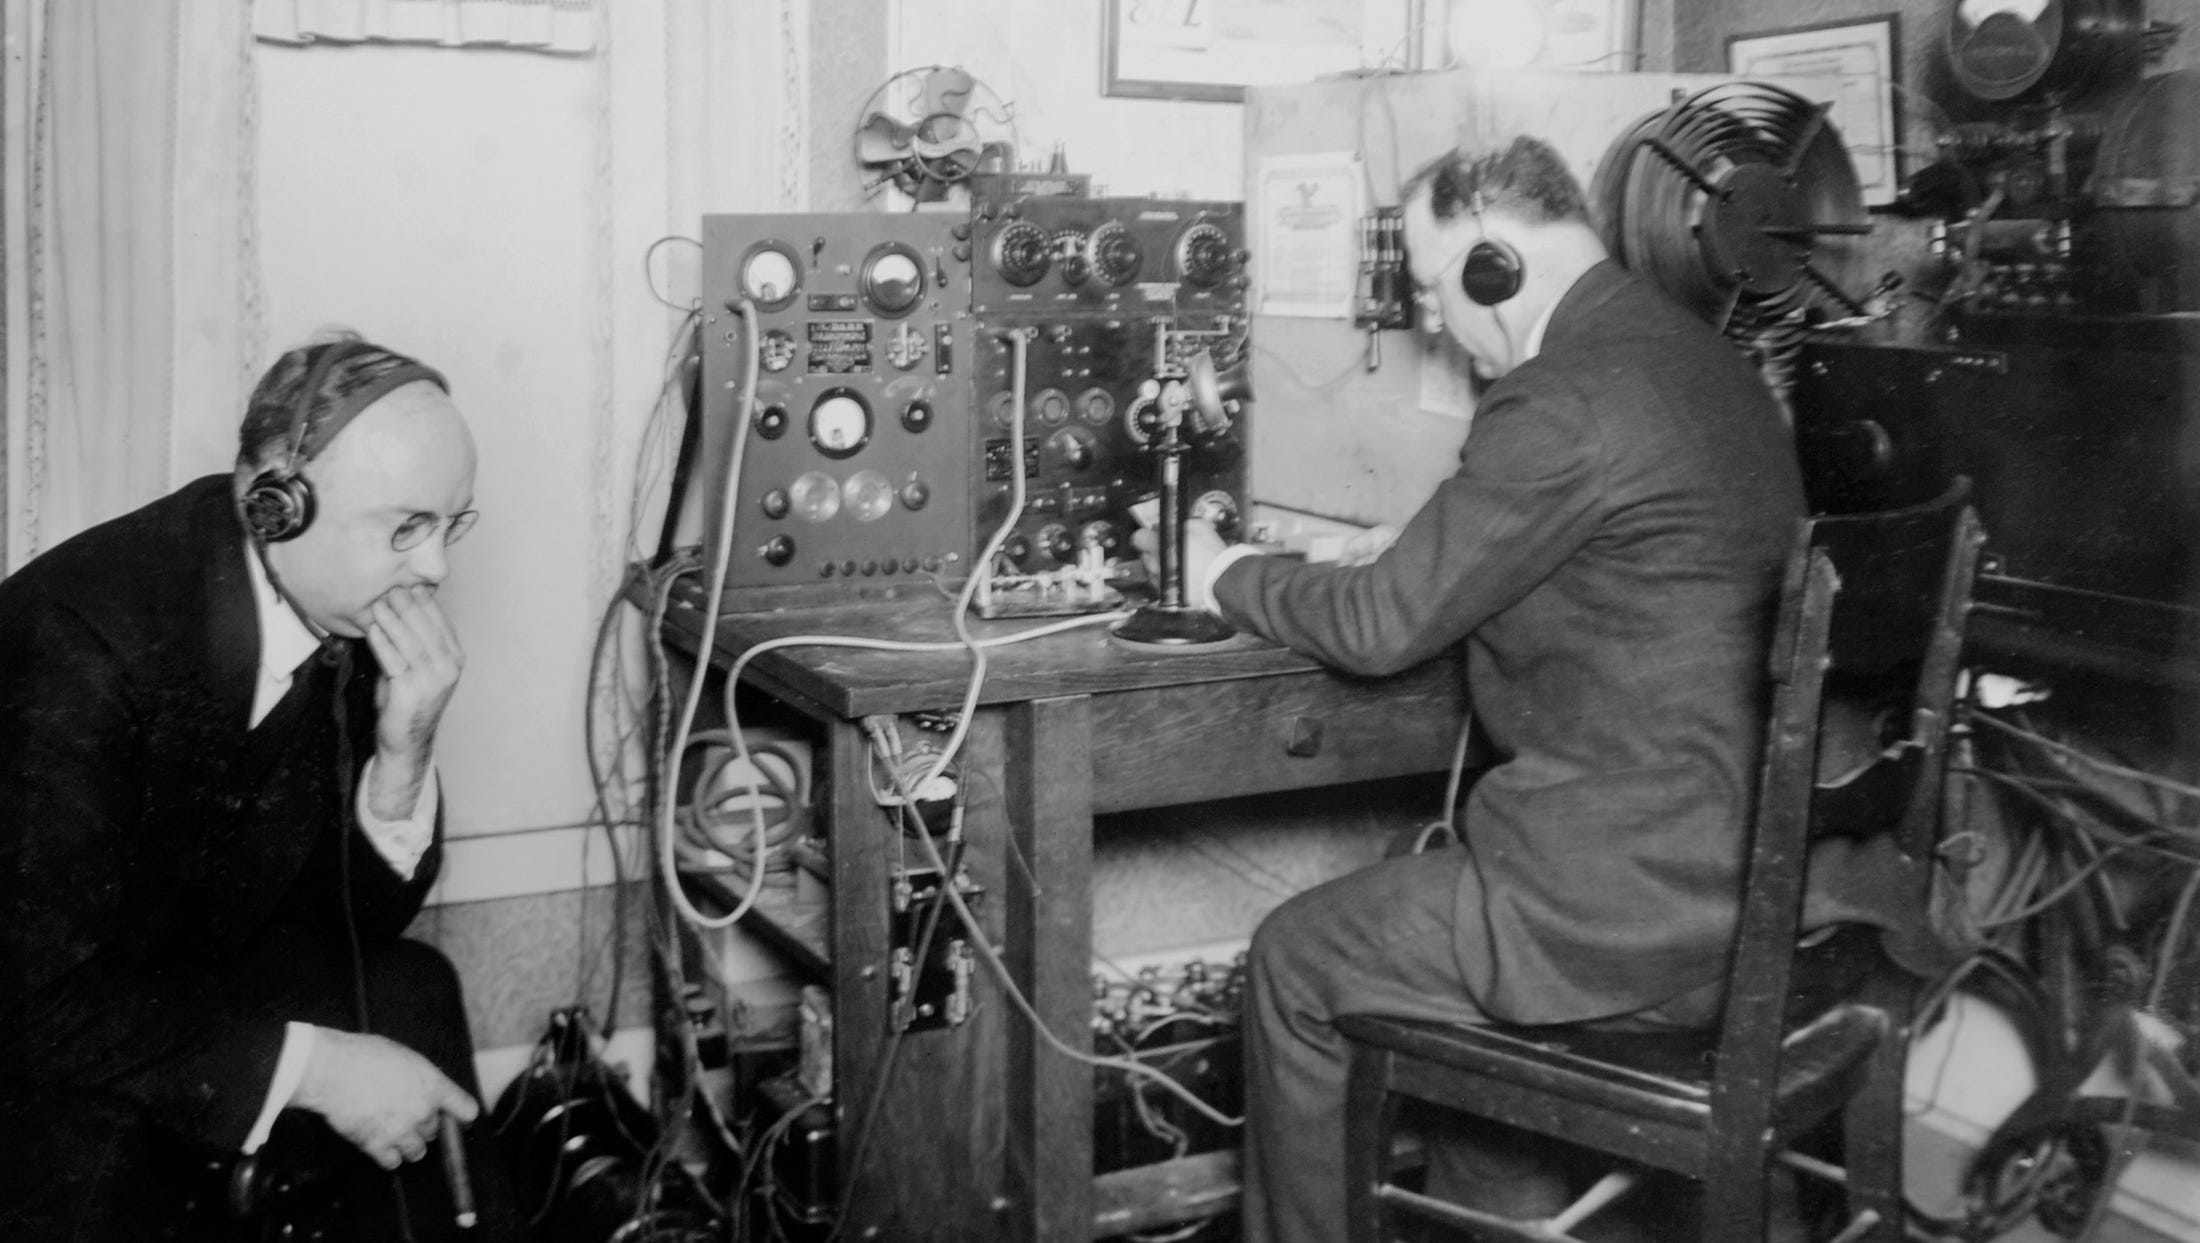 In 1920, Clyde E. Darr, right, handles the controls of his transmitter at 137 Hill Avenue in Highland Park, while Detroit News building superintendent W.E.McGuire, left, listens. It was one of several experiments before The Detroit News would become the first newspaper to have its own radio station, which it set up in a quiet corner of its building.